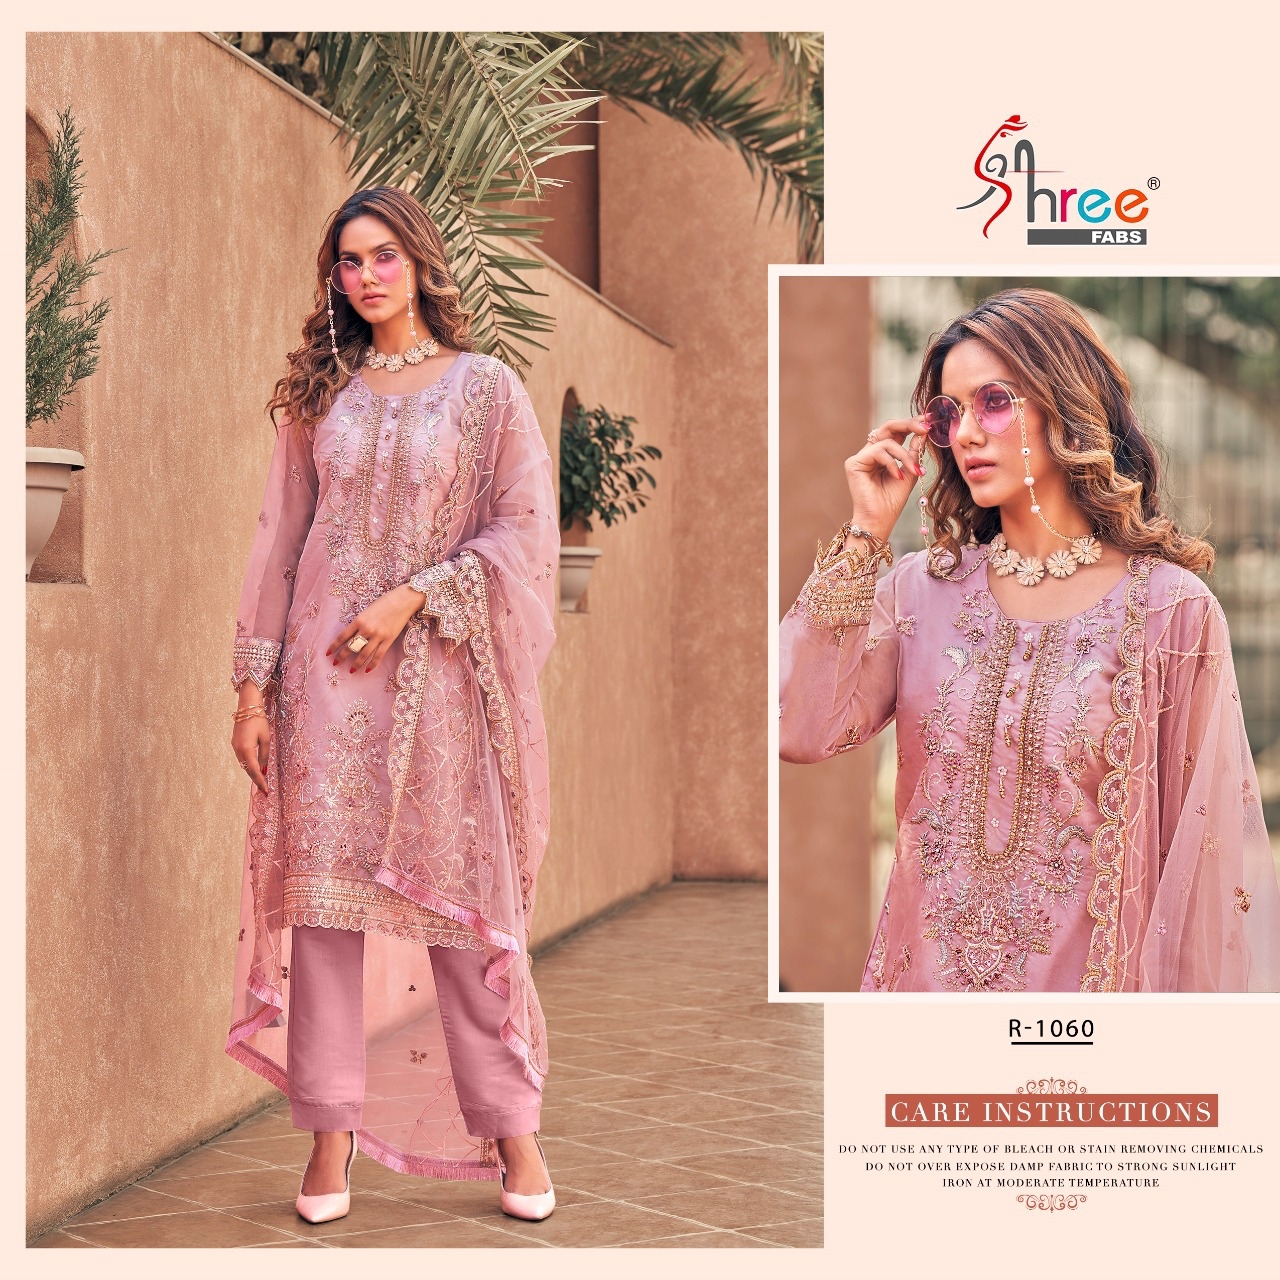 SHREE FABS R 1060 READYMADE PAKISTANI SUITS IN INDIA